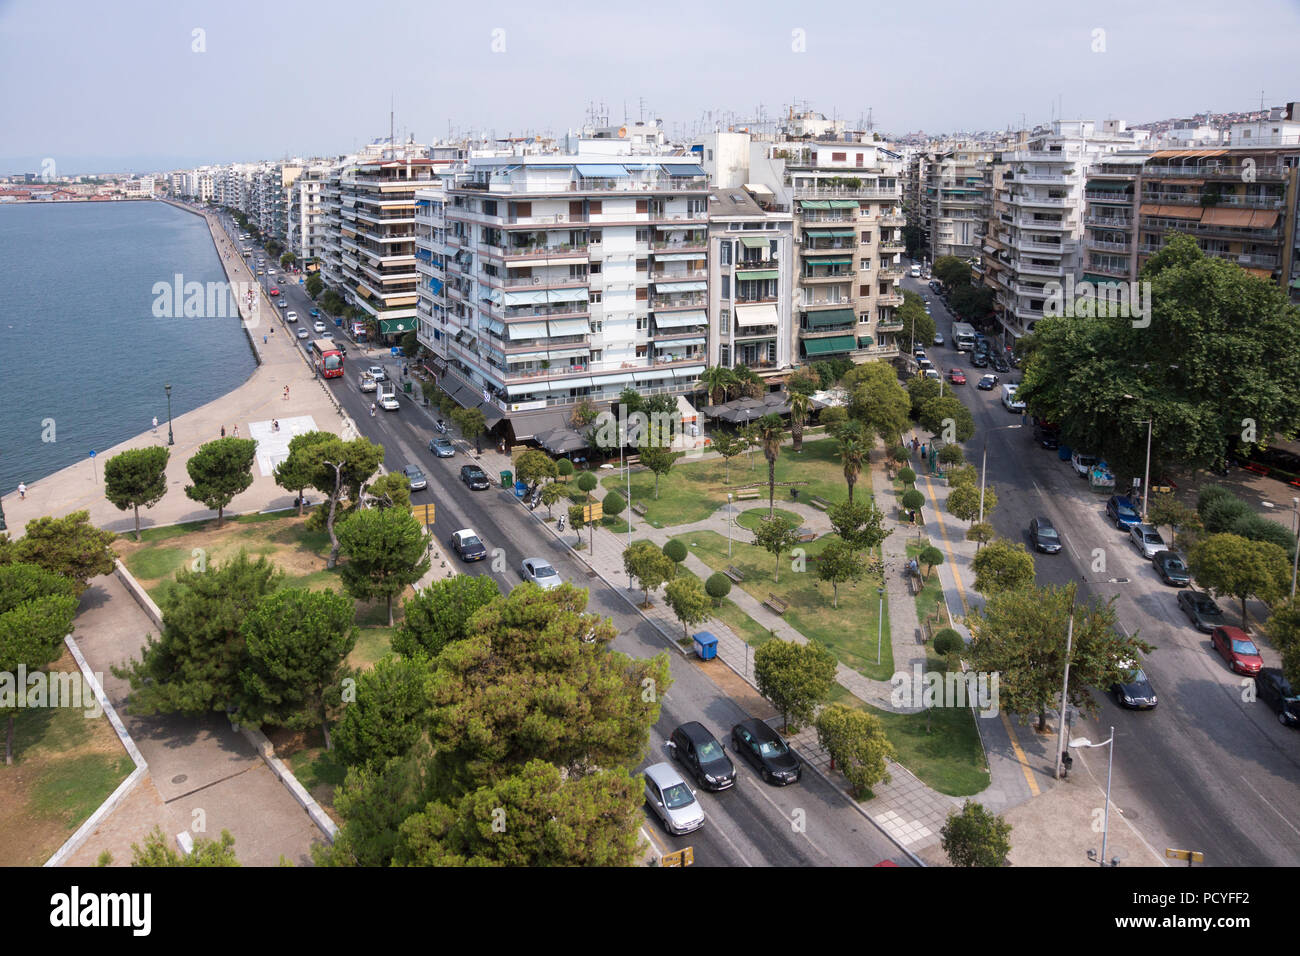 An aerial  view across Thessaloniki waterfront and city taken from the White Tower of the city of Thessaloniki, Greece Stock Photo